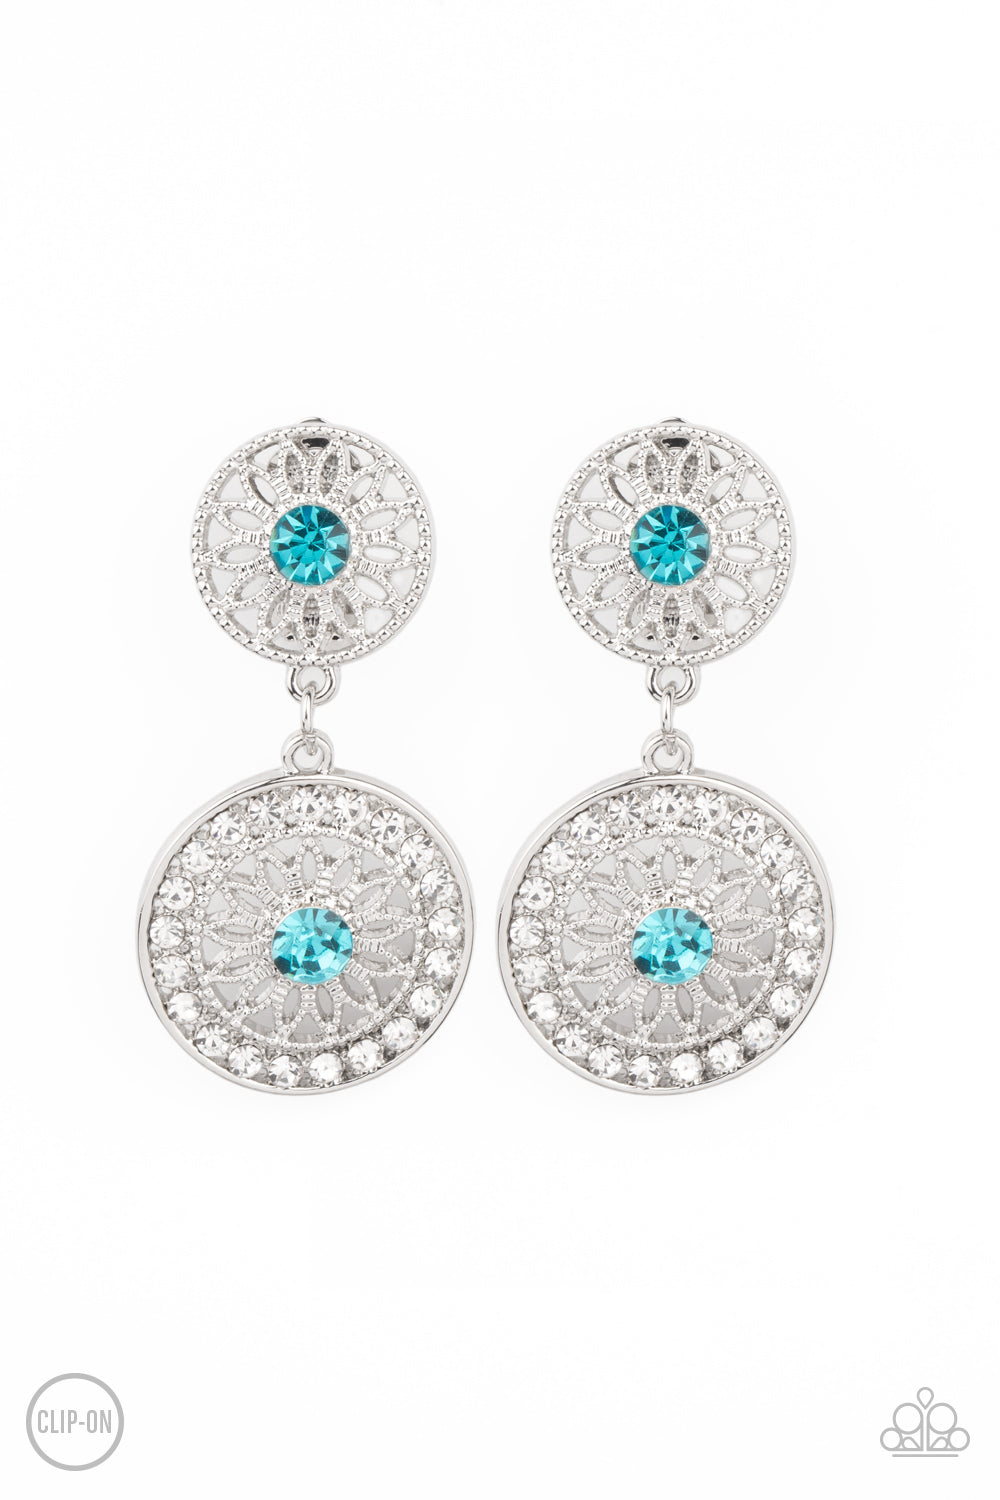 Life of The Garden Party - blue - Paparazzi CLIP ON earrings ...